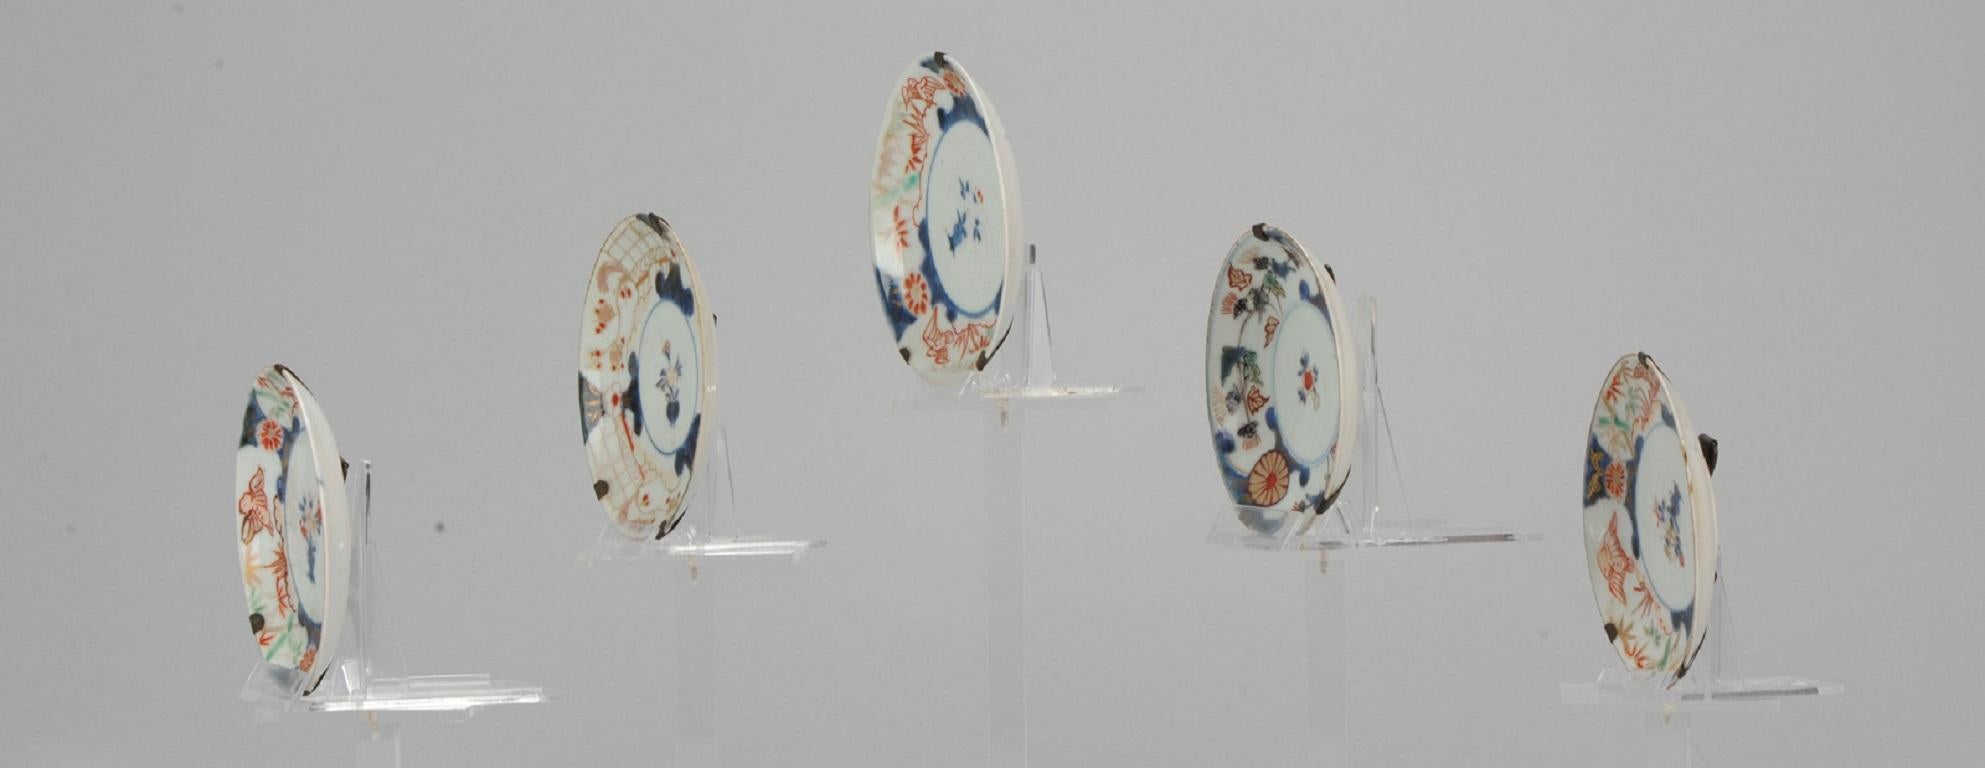 Large set of Chinese Porcelain Saucers.

Additional information:
Material: Porcelain & Pottery
Type: Plates, Tea Bowls & Cups, Tea Drinking
Region of Origin: China
Maker: Kangxi (1661-1722)
Period: 18th century Qing (1661 - 1912)
Age: